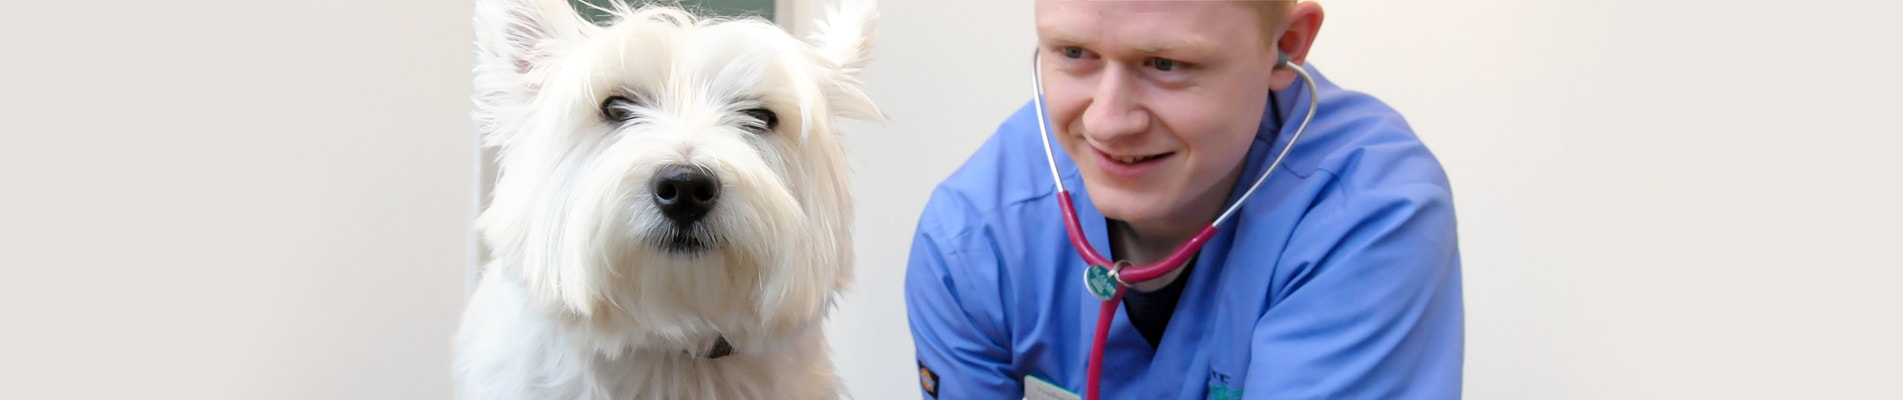 Specialist Services from St Clair Veterinary Group in Fife